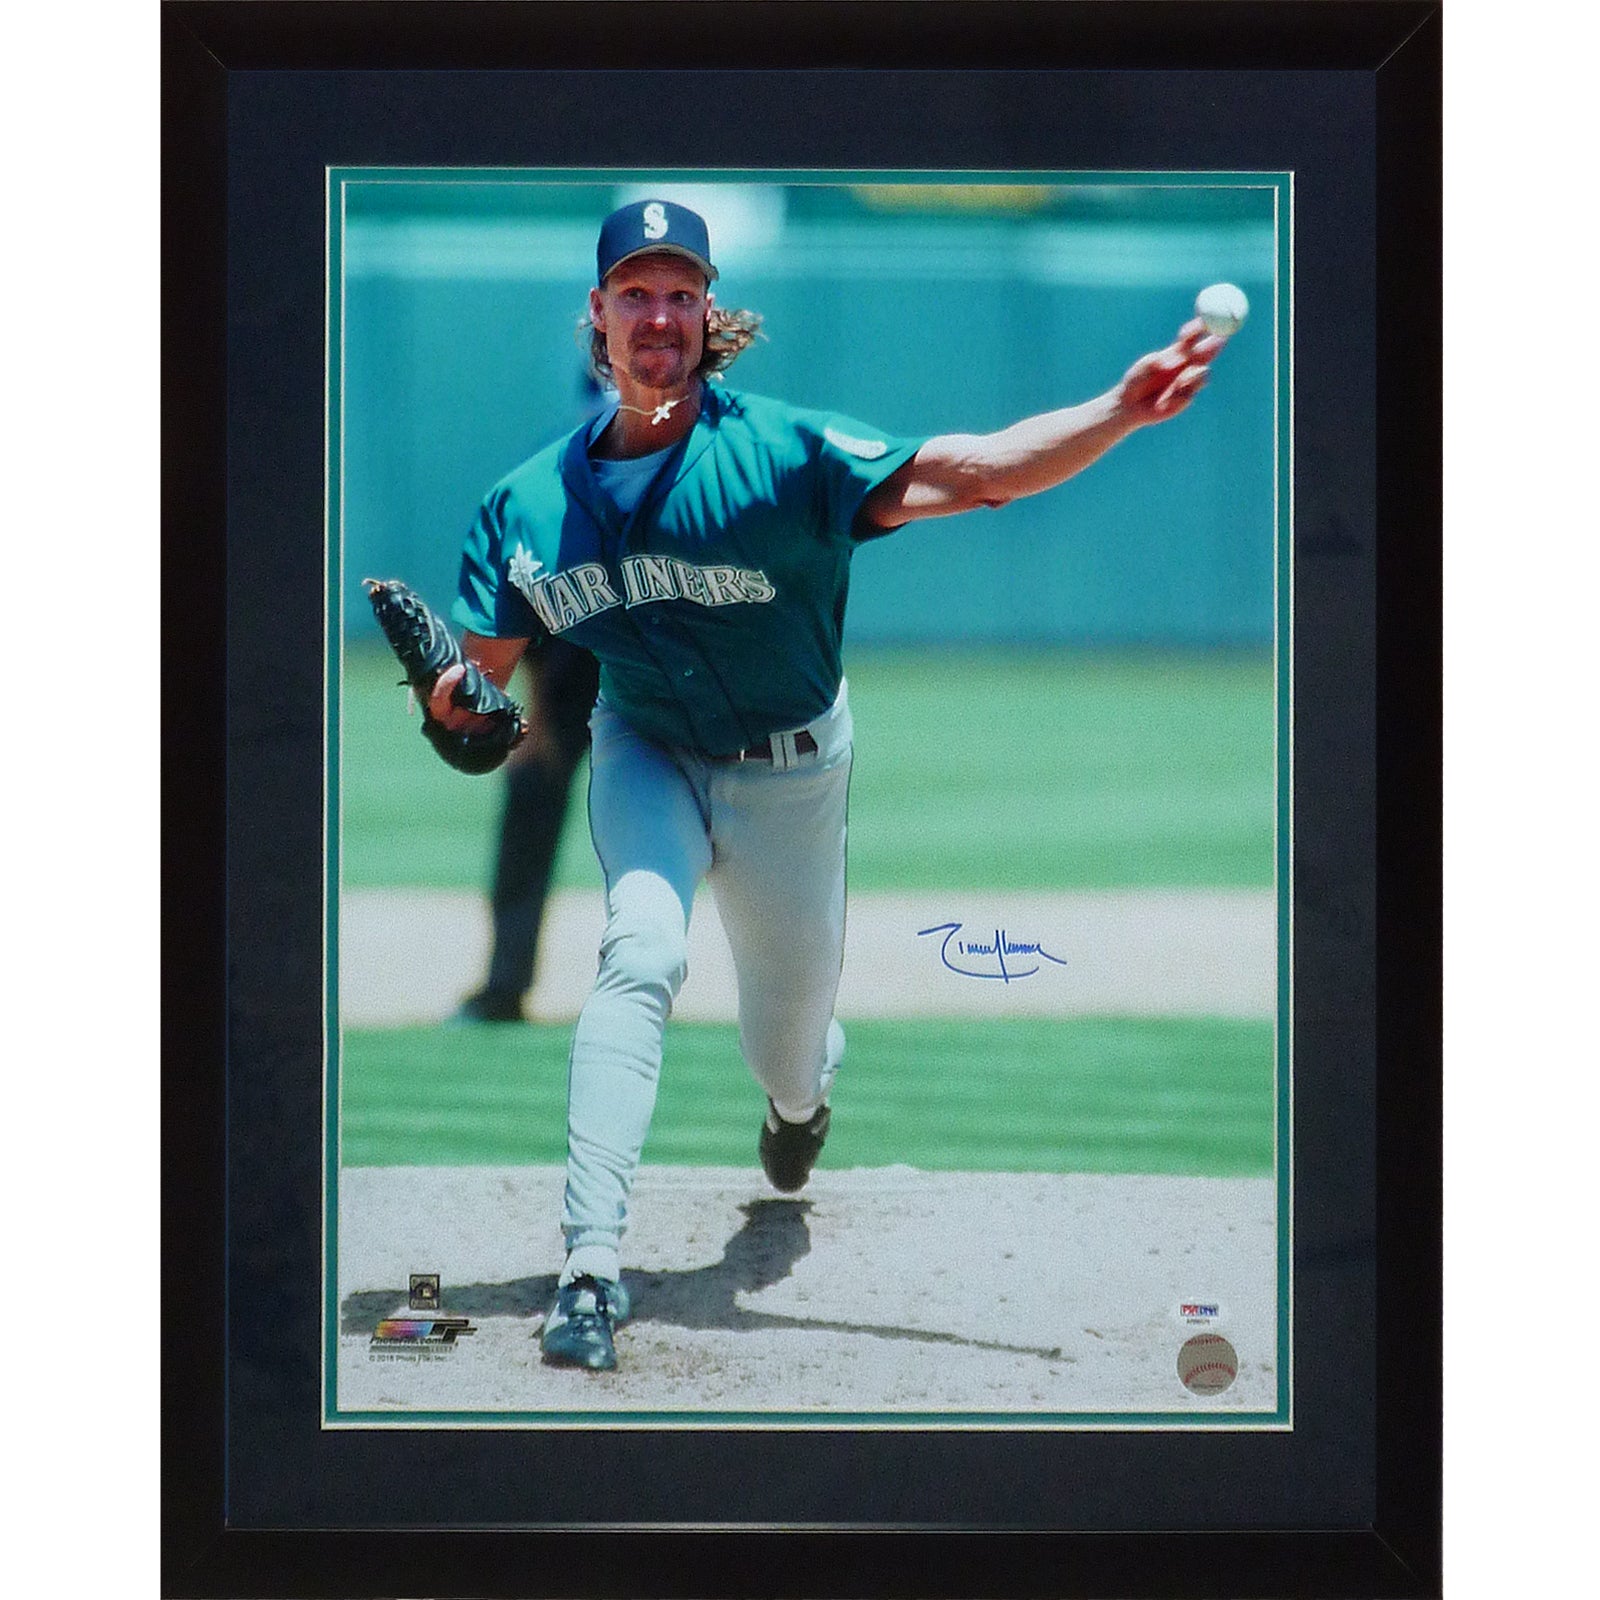 Randy Johnson Autographed Seattle Mariners Deluxe Framed 16x20 Photo - PSADNA